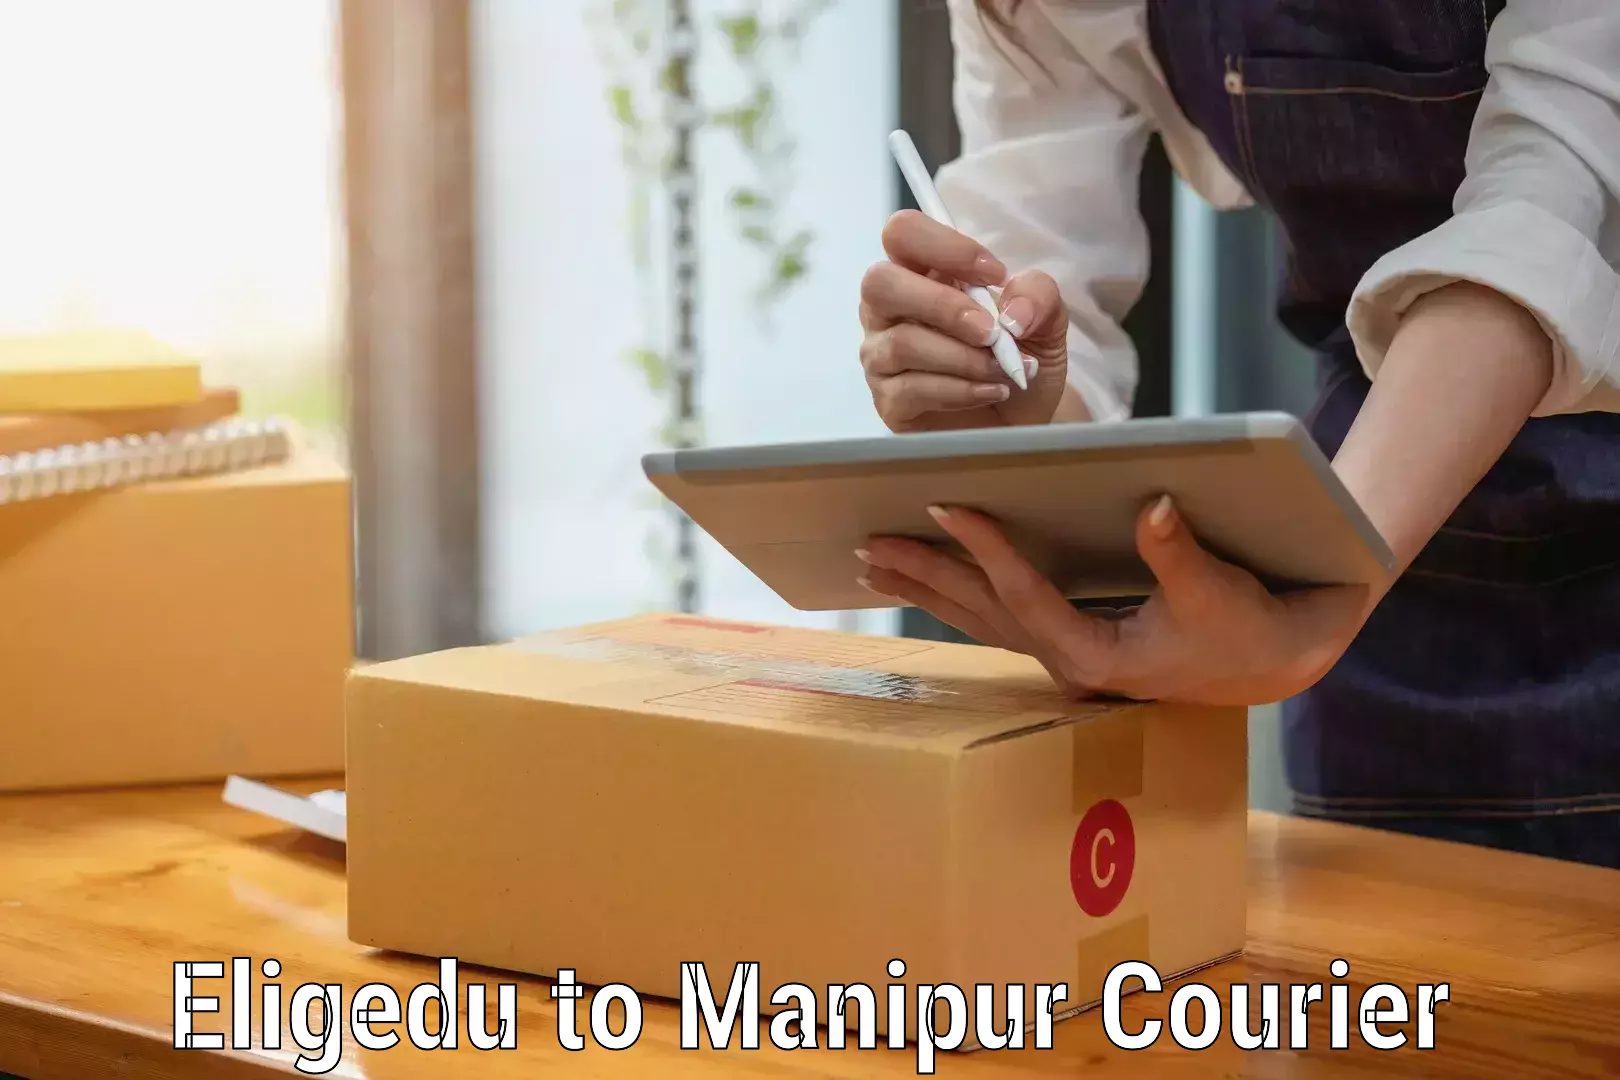 Home shifting services Eligedu to Manipur